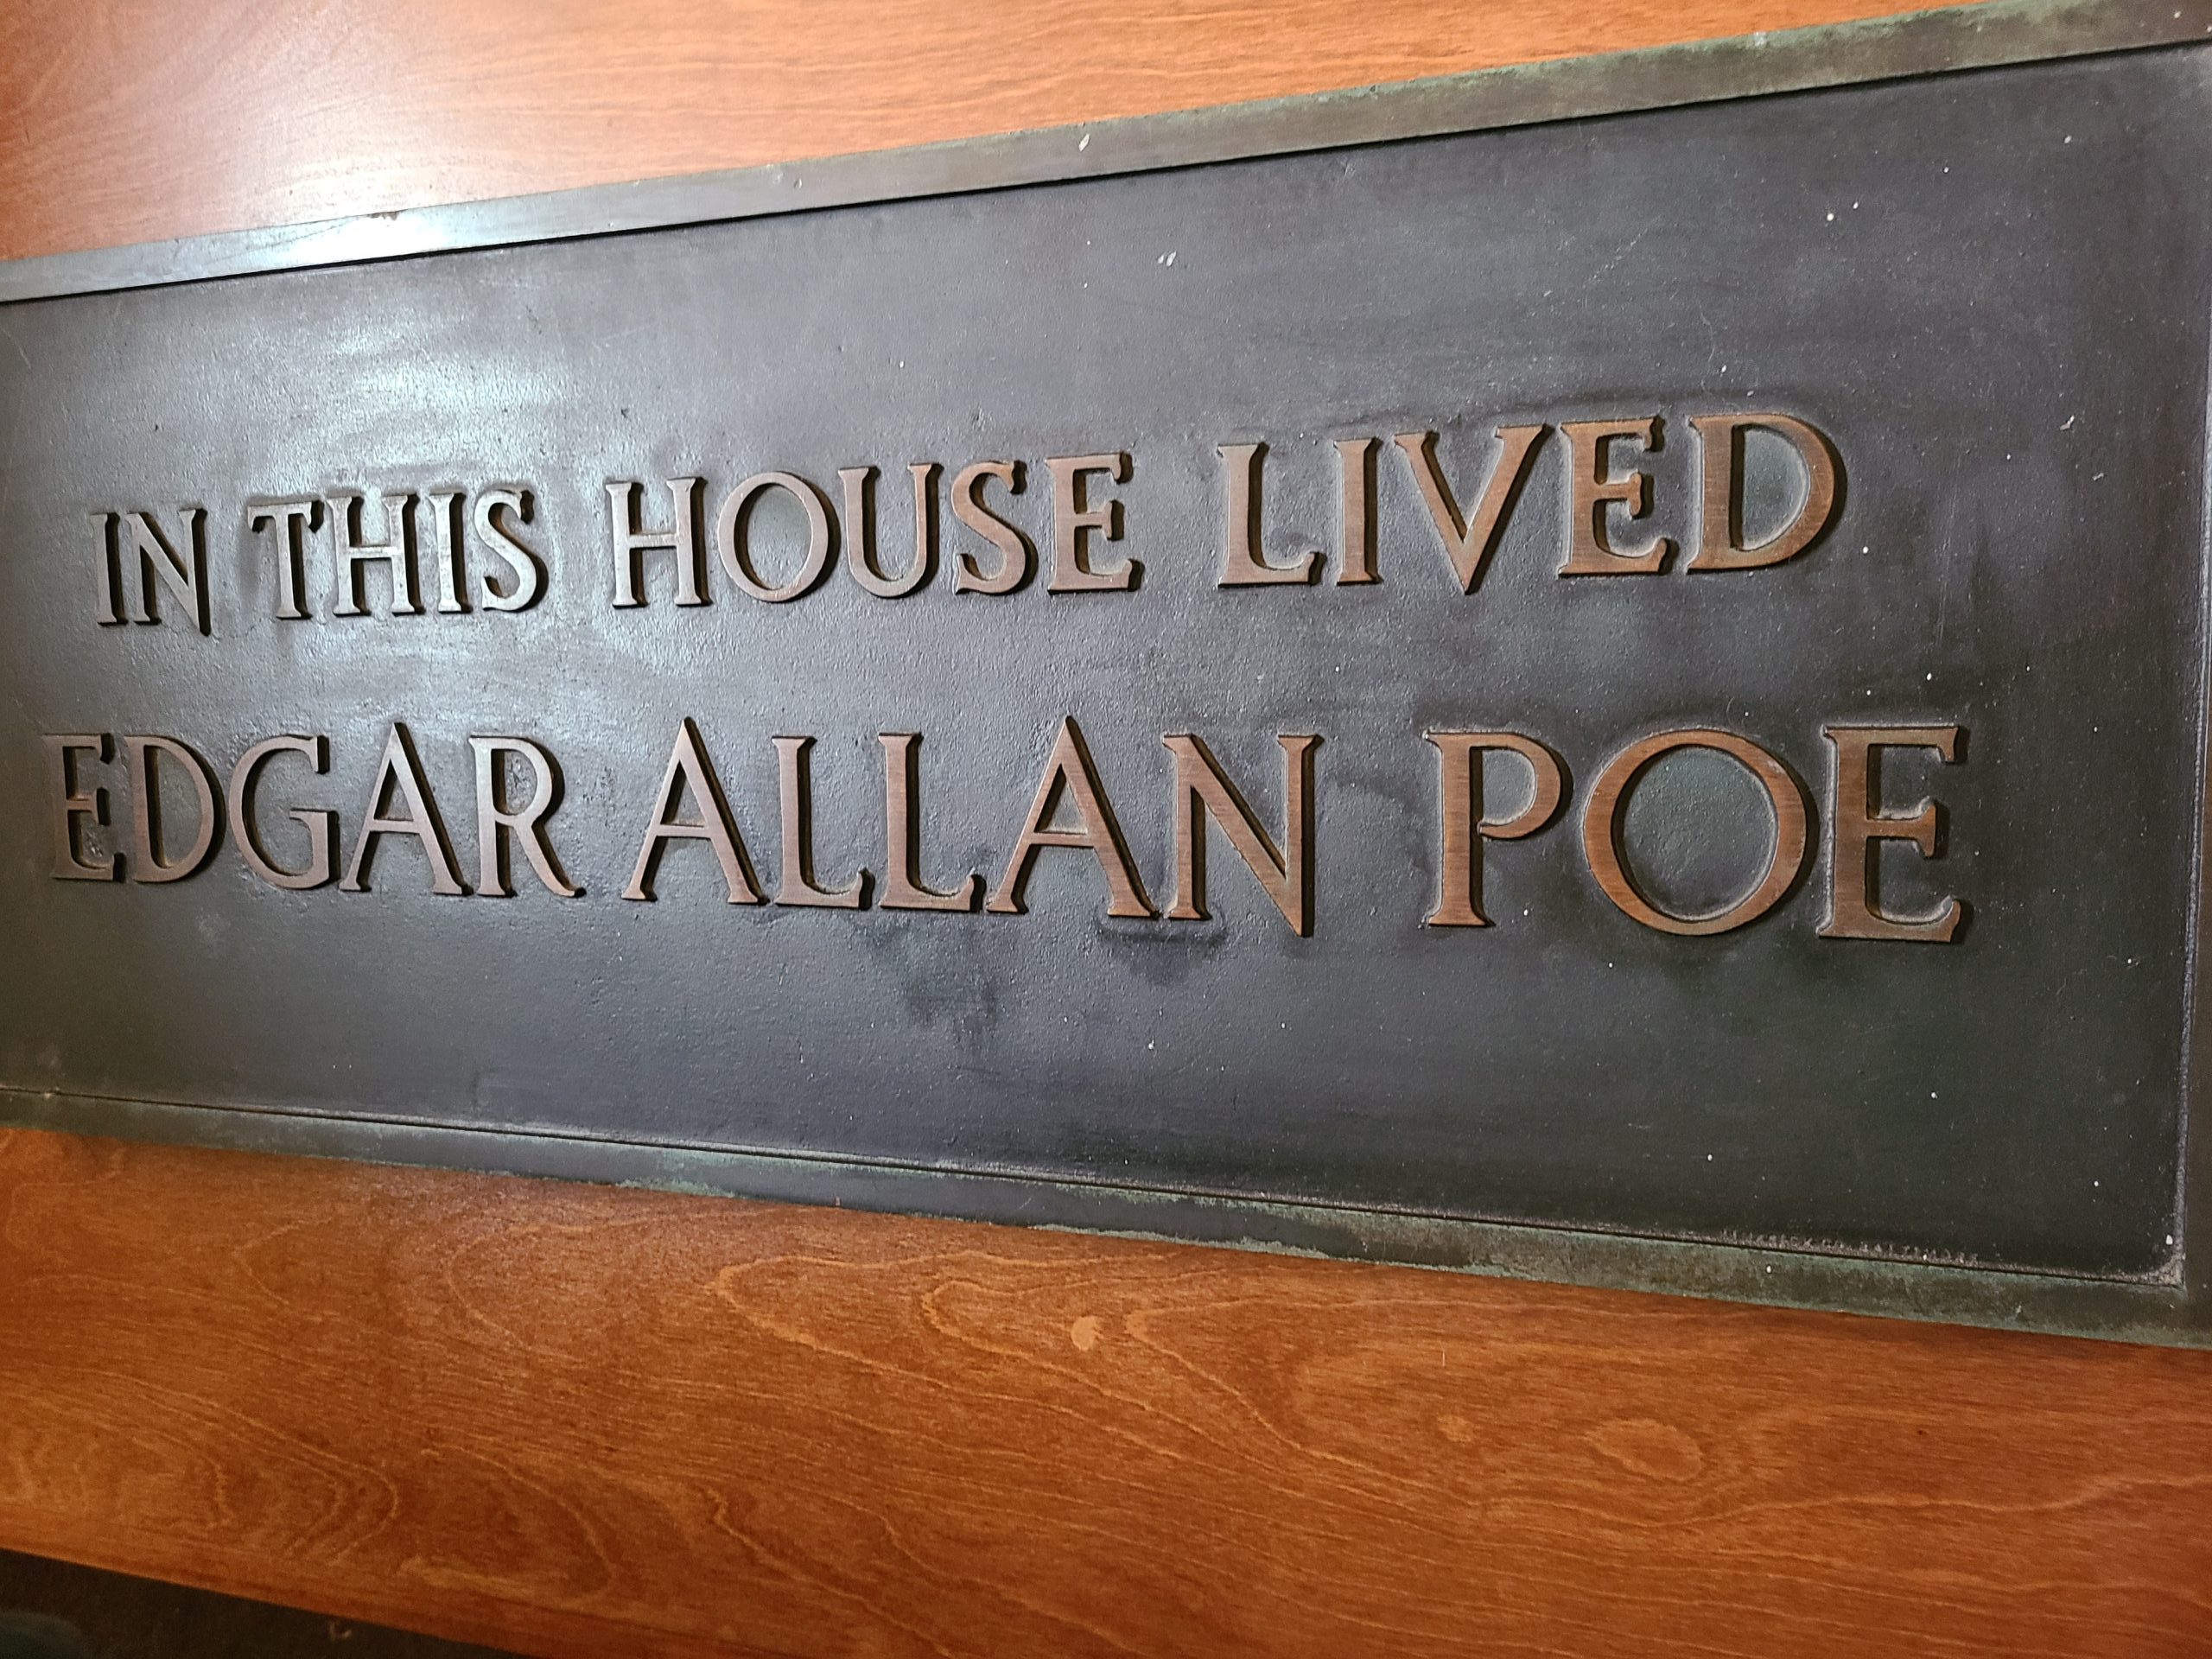 A metal plaque declaring that this is the Edgar Allan Poe house